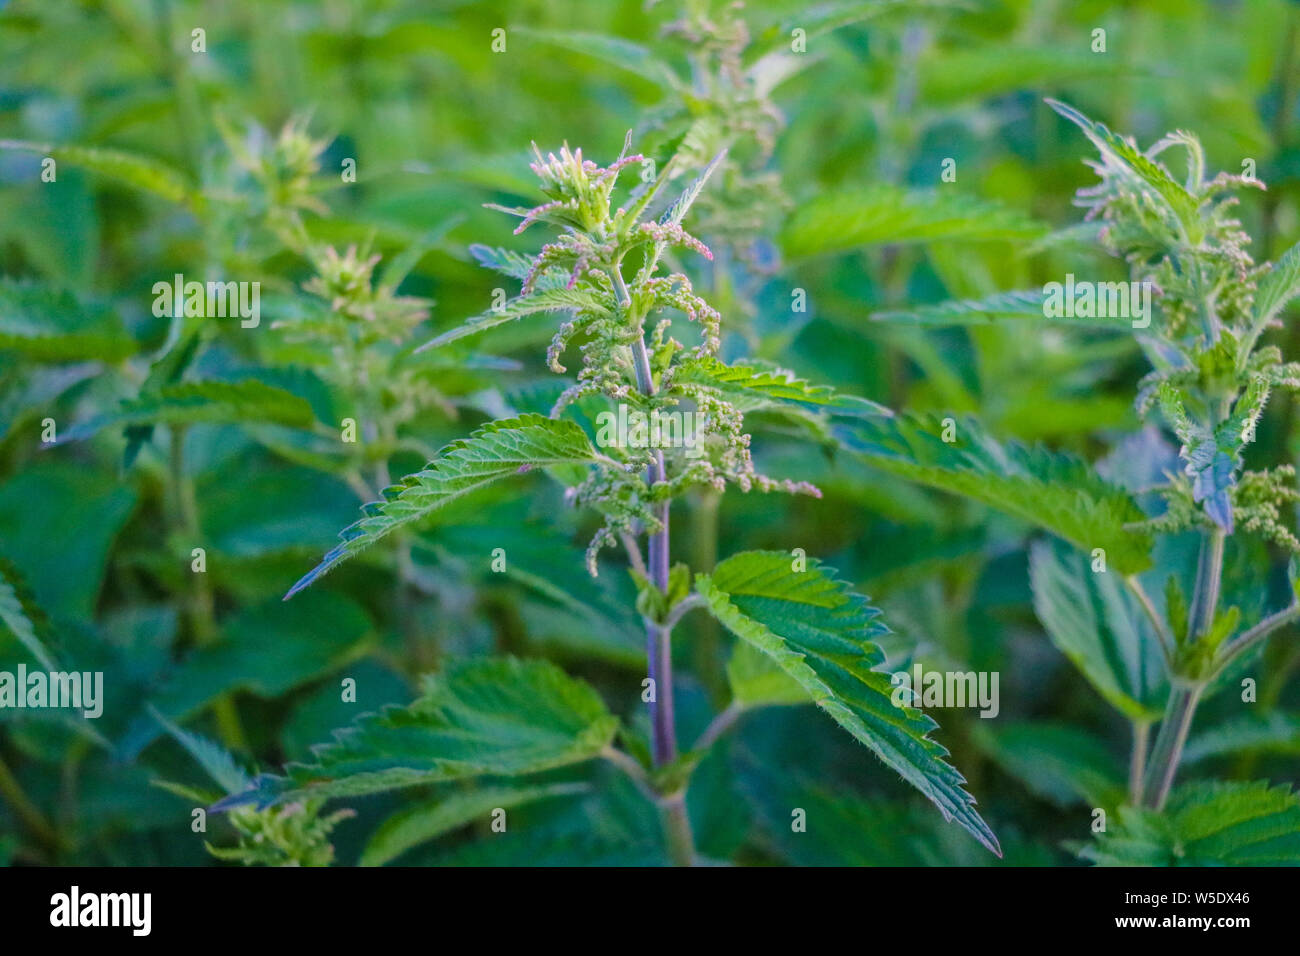 Urtica dioica, common or stinging nettles background. Fresh green nettles in springtime, alternative medicine, healthy herb Stock Photo